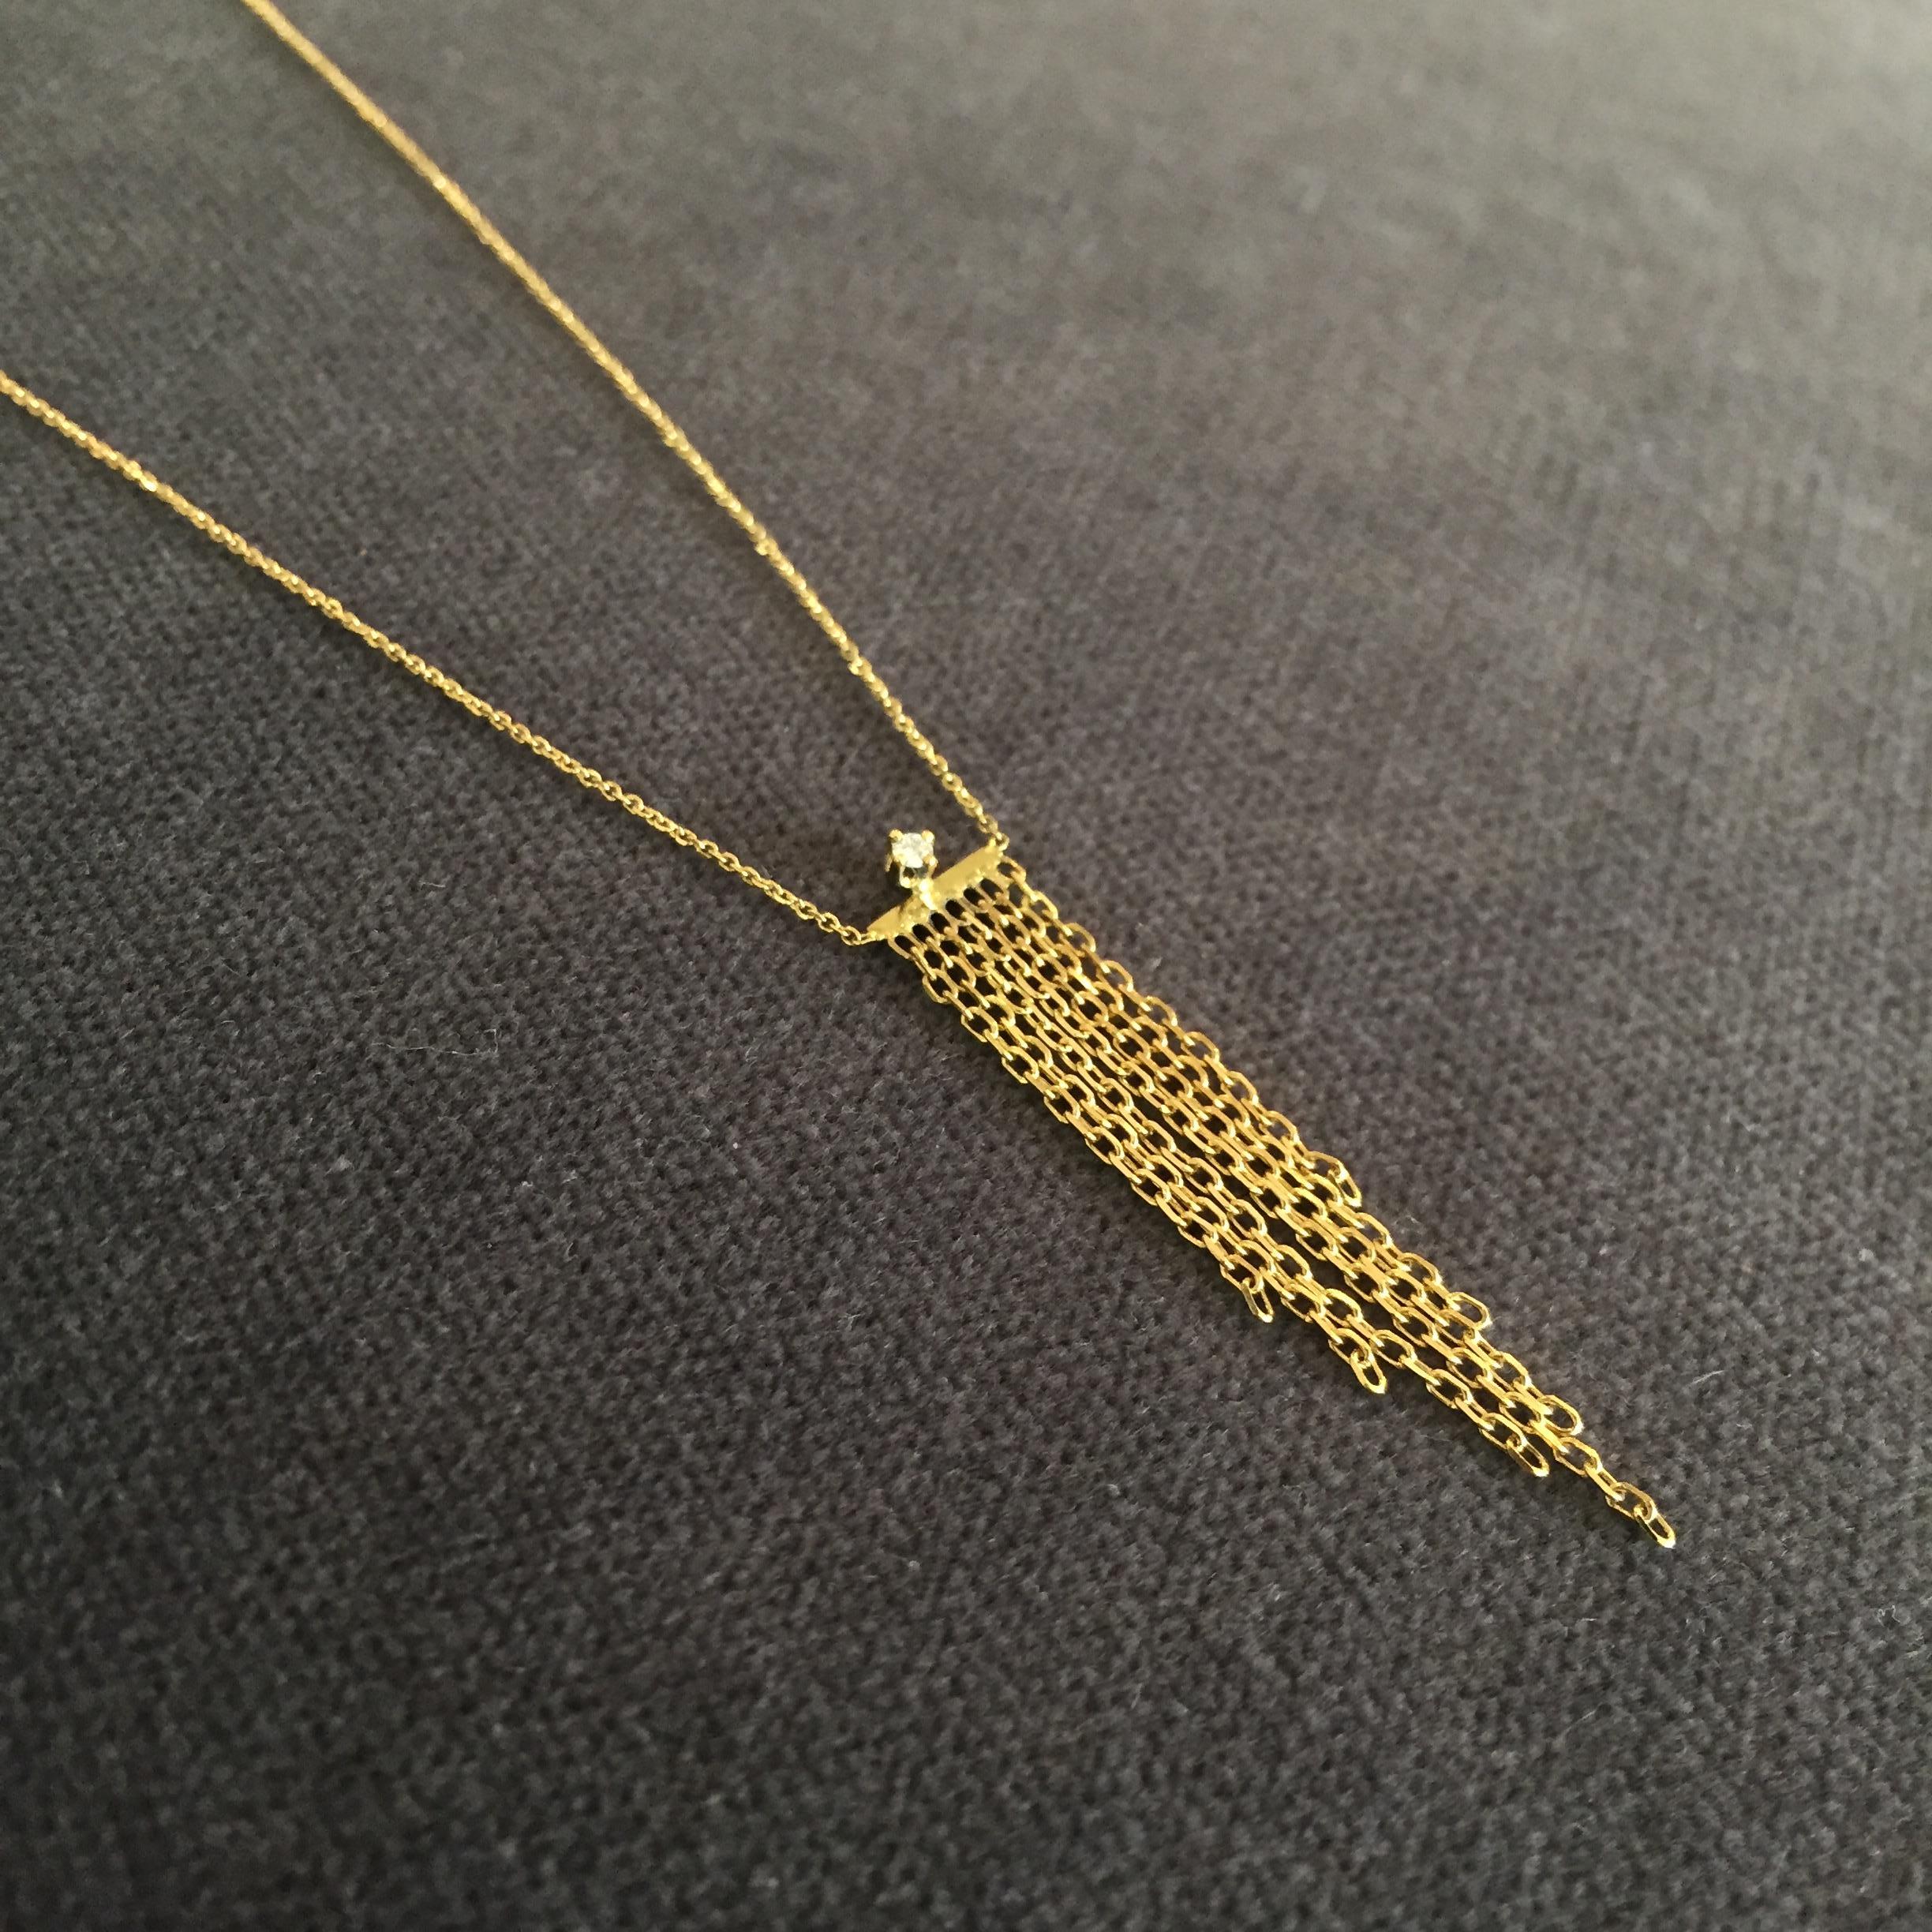 This 18k yellow gold necklace from Sweet Pea's 'Fabulous Fringe' collection has a tapered 35mm long fringe made of diamond-cut chain, topped with a sparkling 0.02ct diamond. The necklace is 38cm long, but can be ordered to any length; please contact